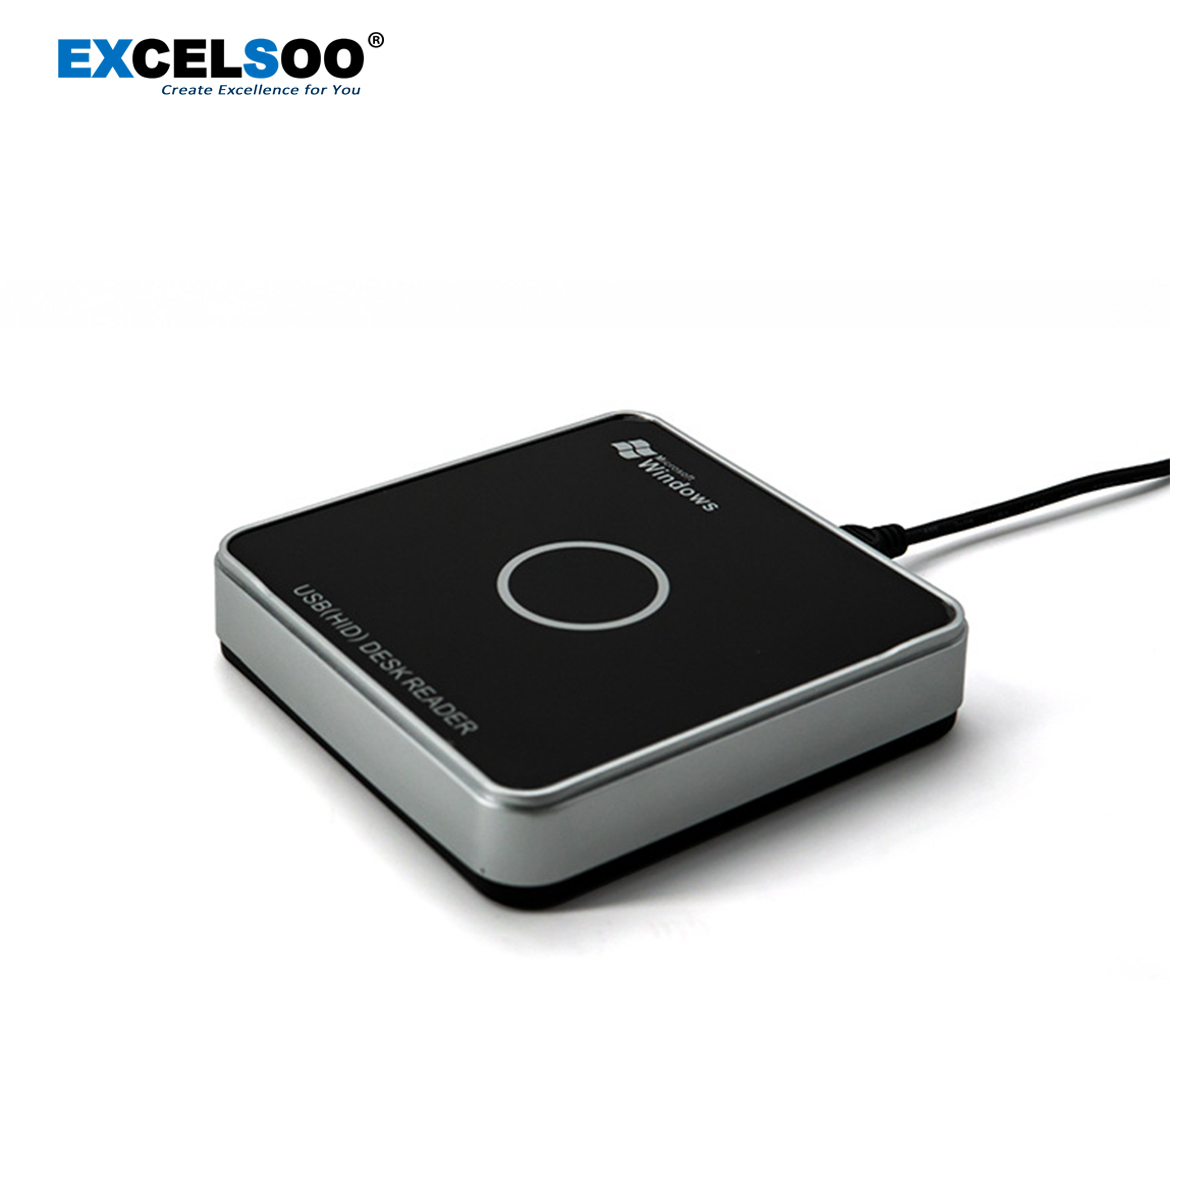 Excelsoo CHAFON built-in 10dBi circular polarized antenna uhf rfid counter antenna USB Manage Readers XR-400